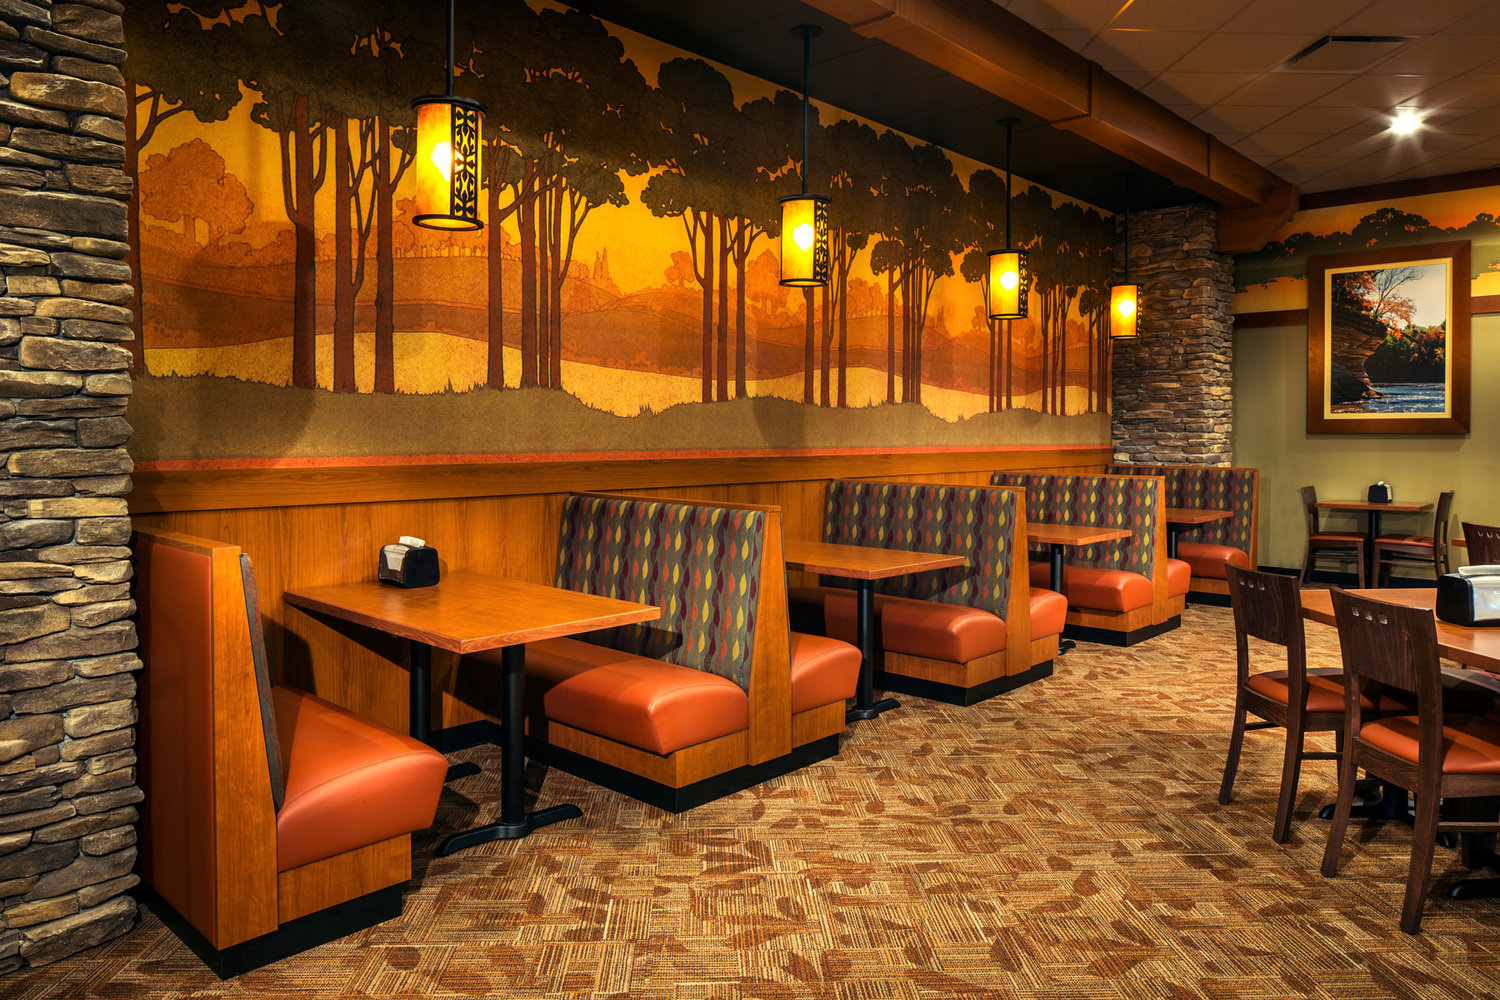 Serving Up the Perfect Booth: The Dos and Don’ts of Restaurant Booth Seating